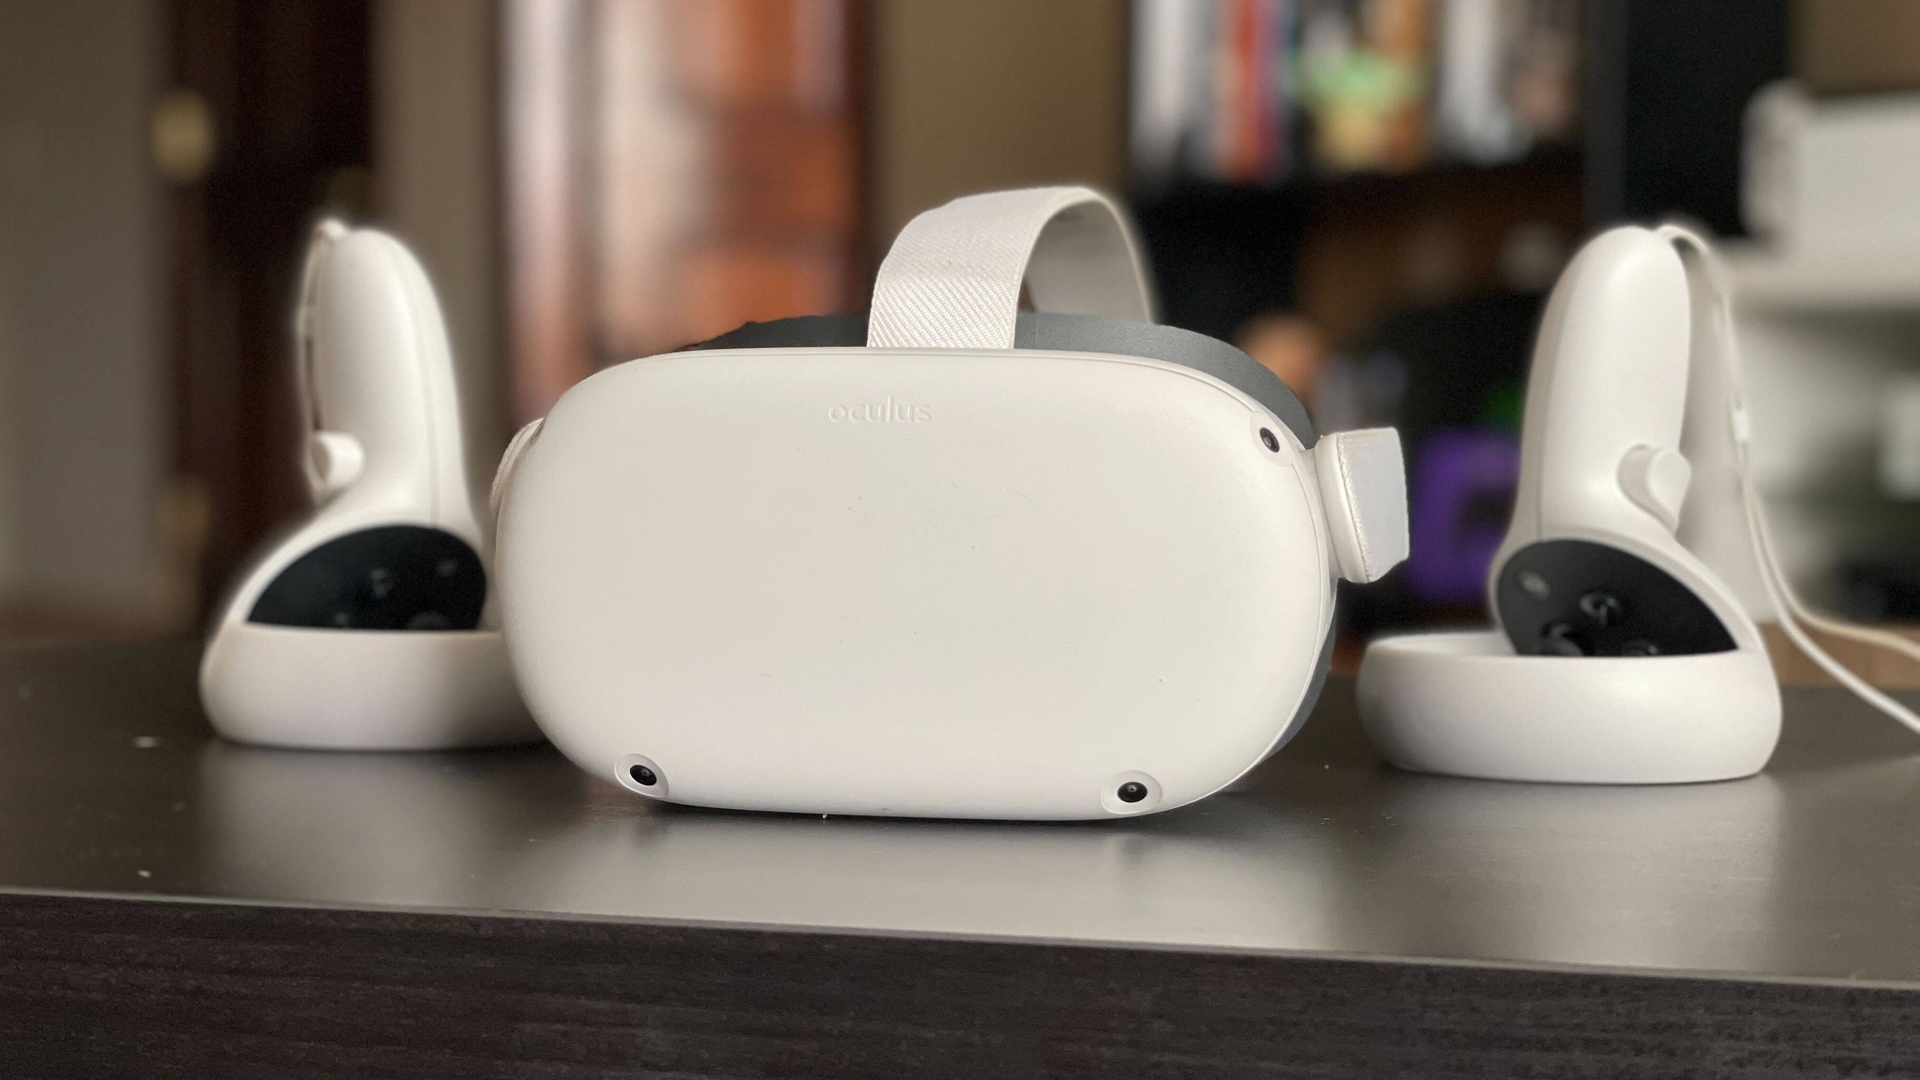 Who would come out on top in PSVR2 vs Quest 2? If supply concerns can be resolved, Sony's headgear will debut near the end of 2022. The Oculus Quest 2 is...